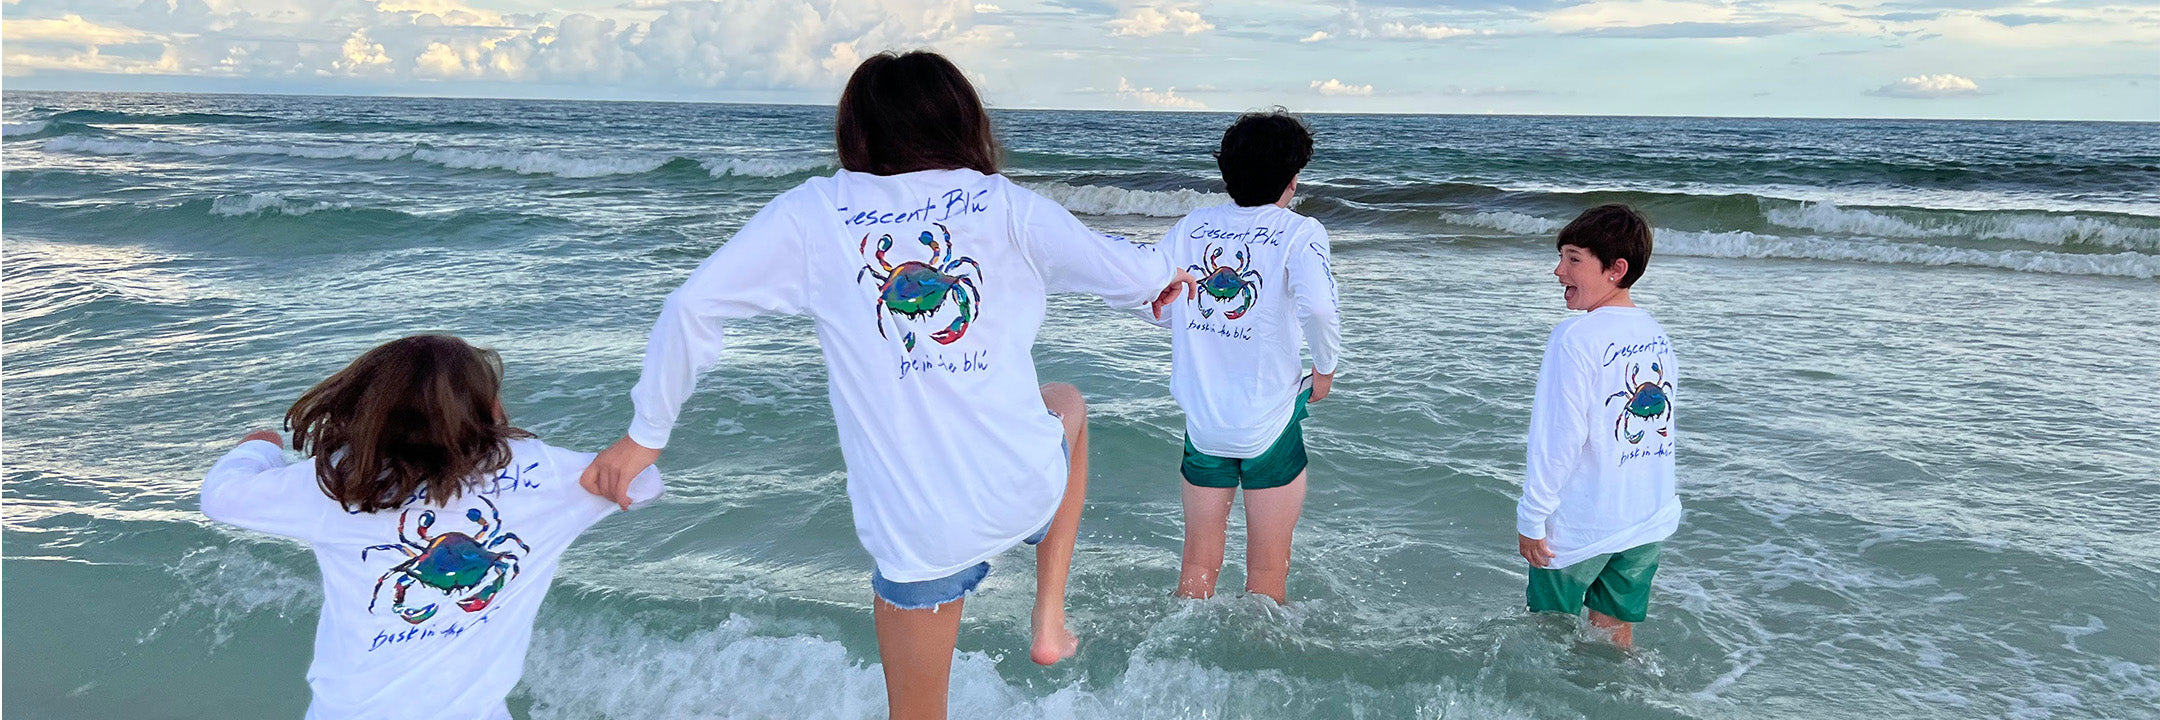 4 kids in matching long sleeve crab shirts play in the ocean waves.